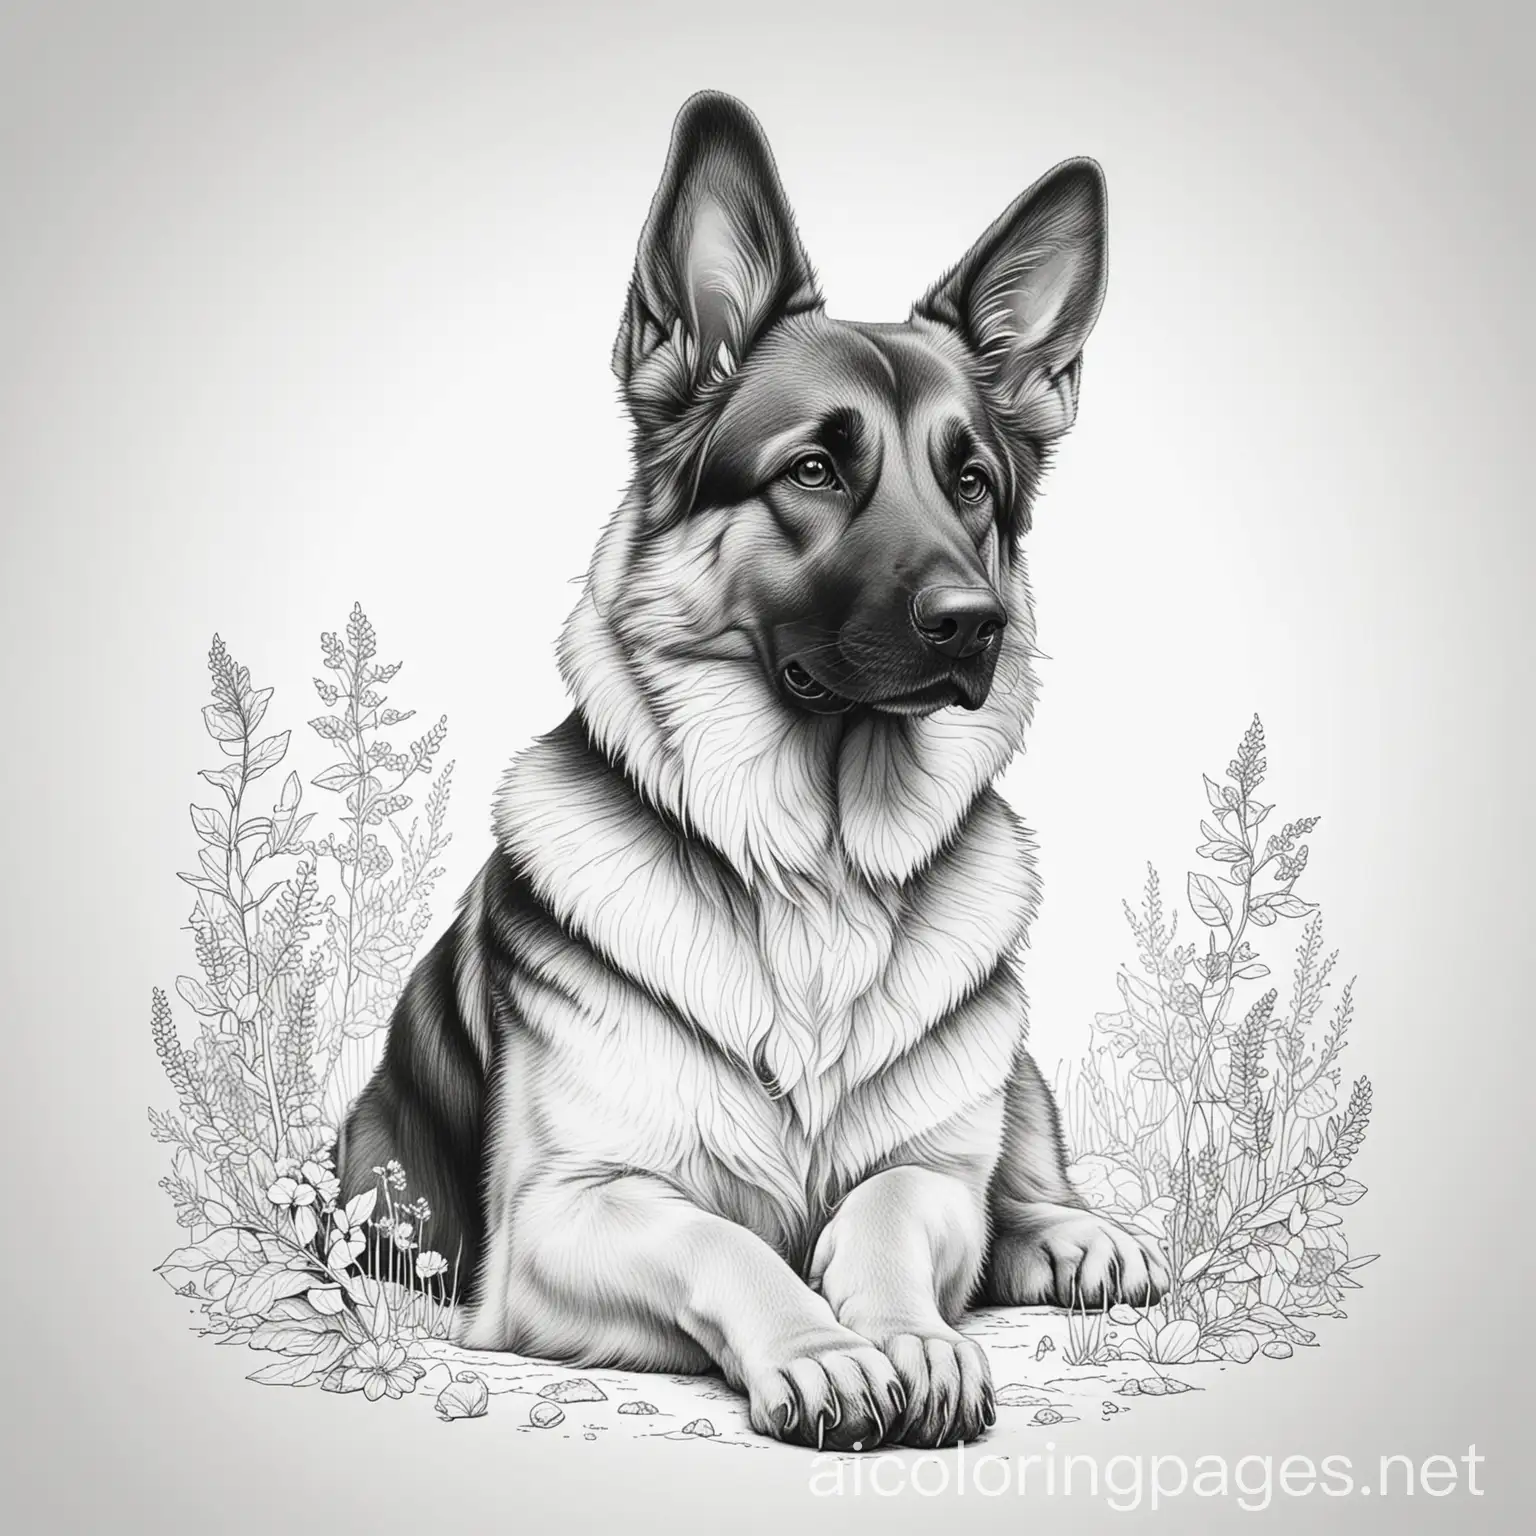 Dreamy fairy German shepherd, Coloring Page, black and white, line art, white background, Simplicity, Ample White Space. The background of the coloring page is plain white to make it easy for young children to color within the lines. The outlines of all the subjects are easy to distinguish, making it simple for kids to color without too much difficulty